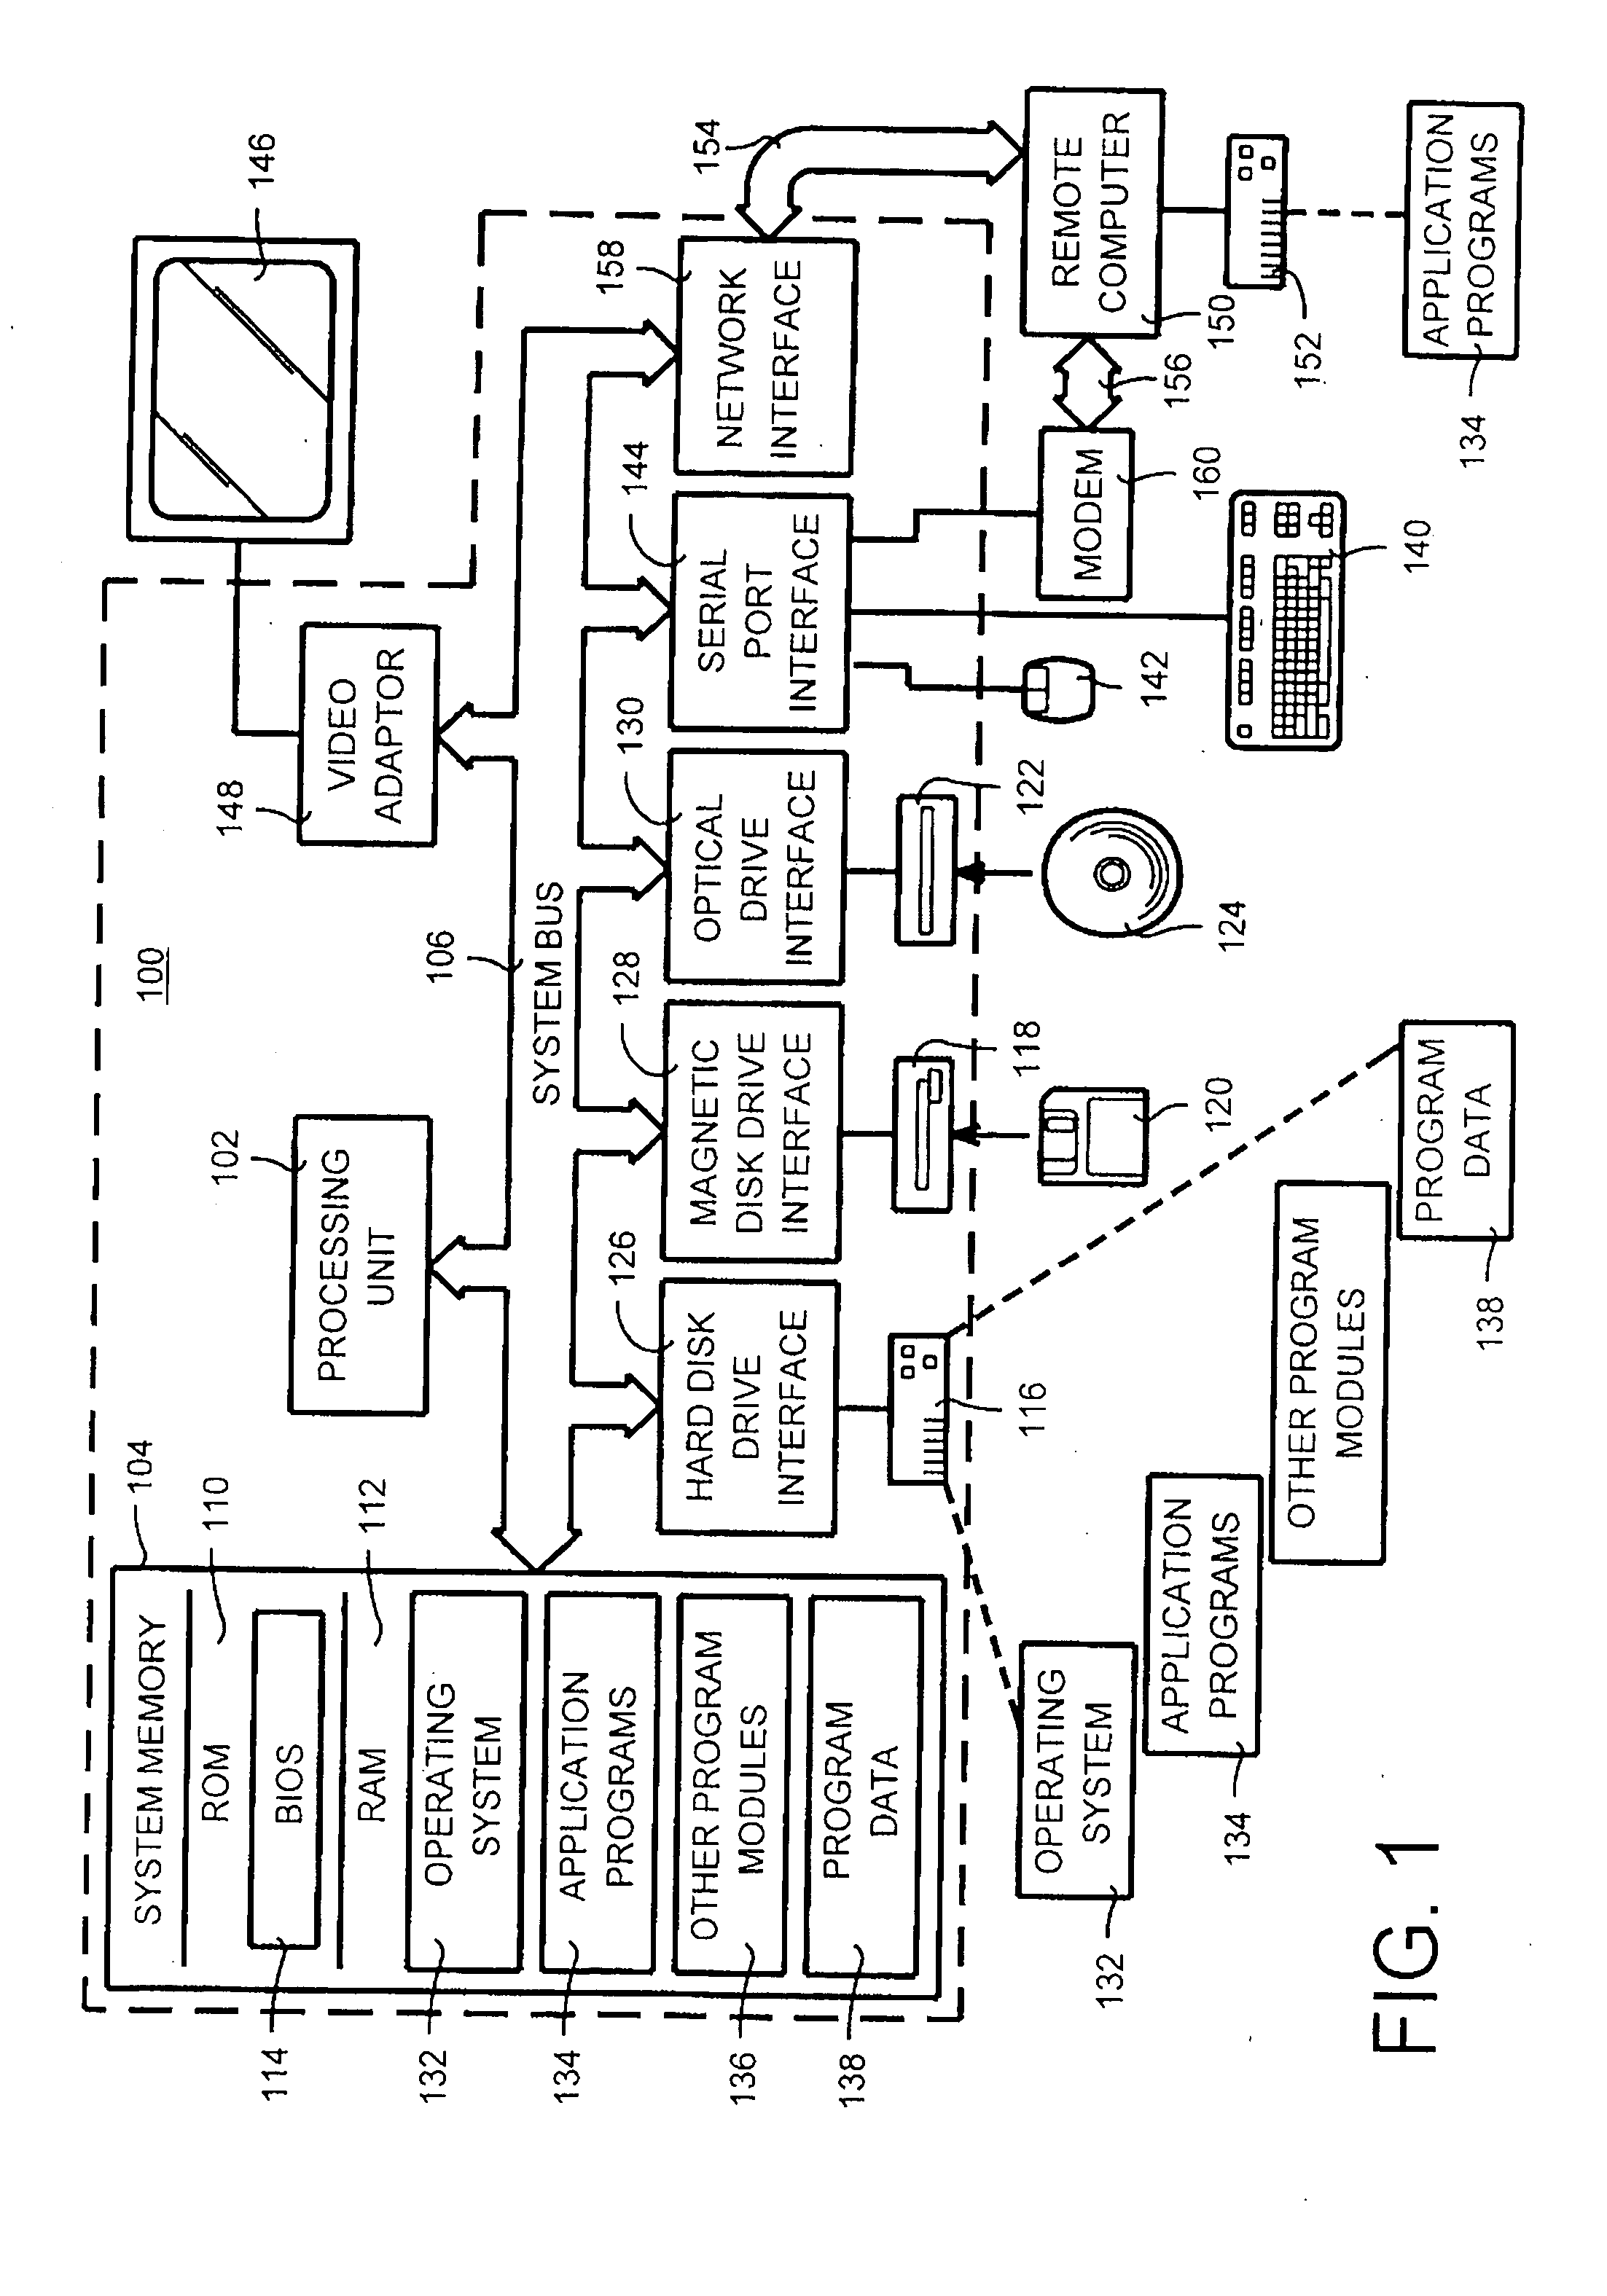 System and method for simulating network connection characteristics